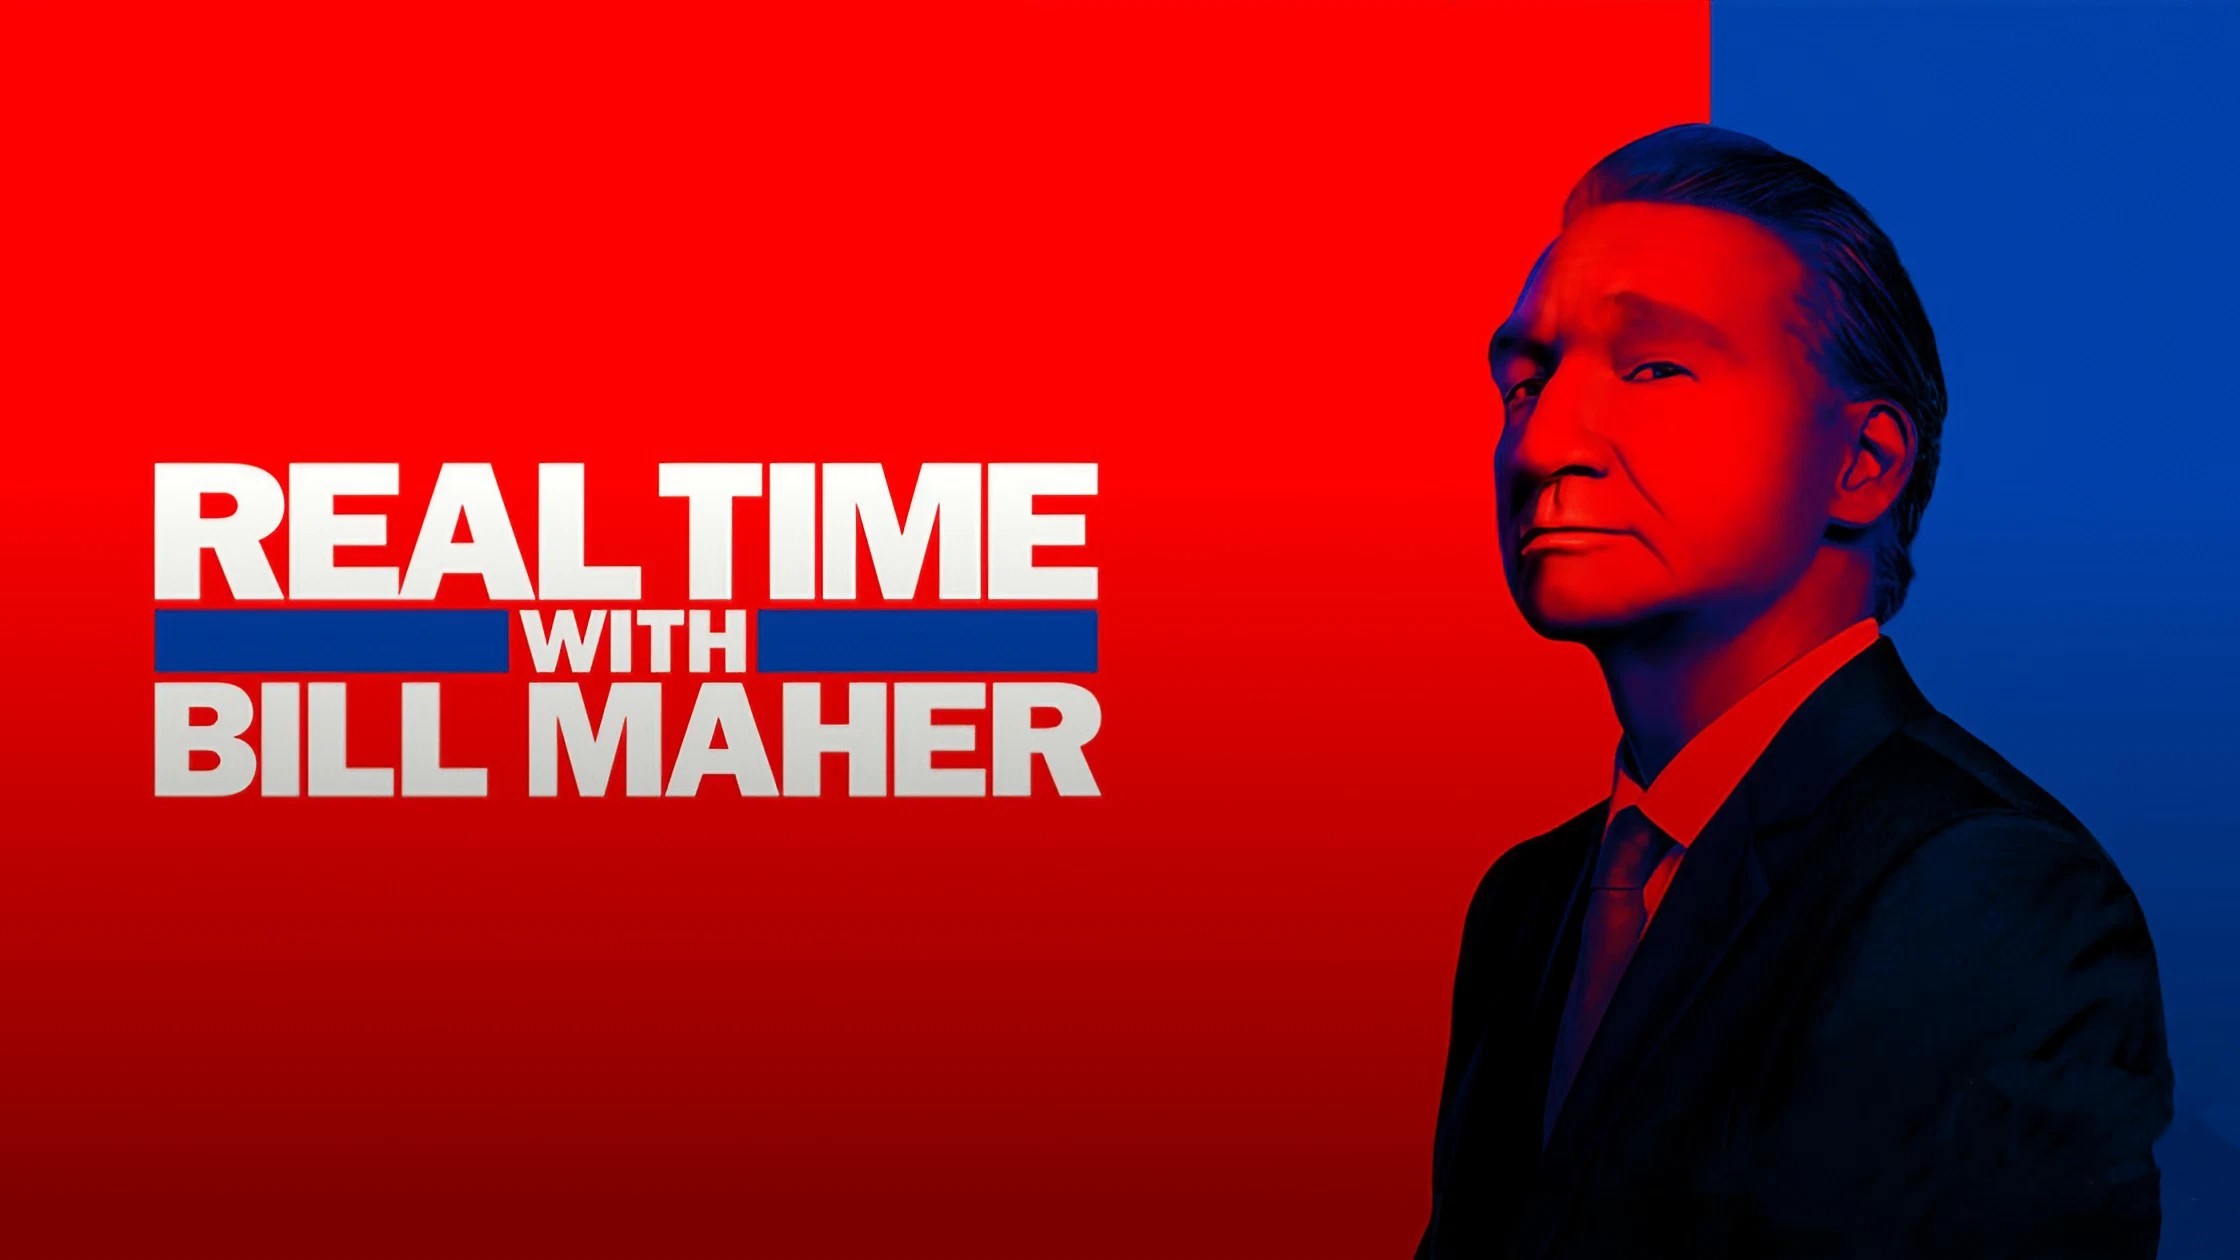 Real Time With Bill Maher Season 22 release date